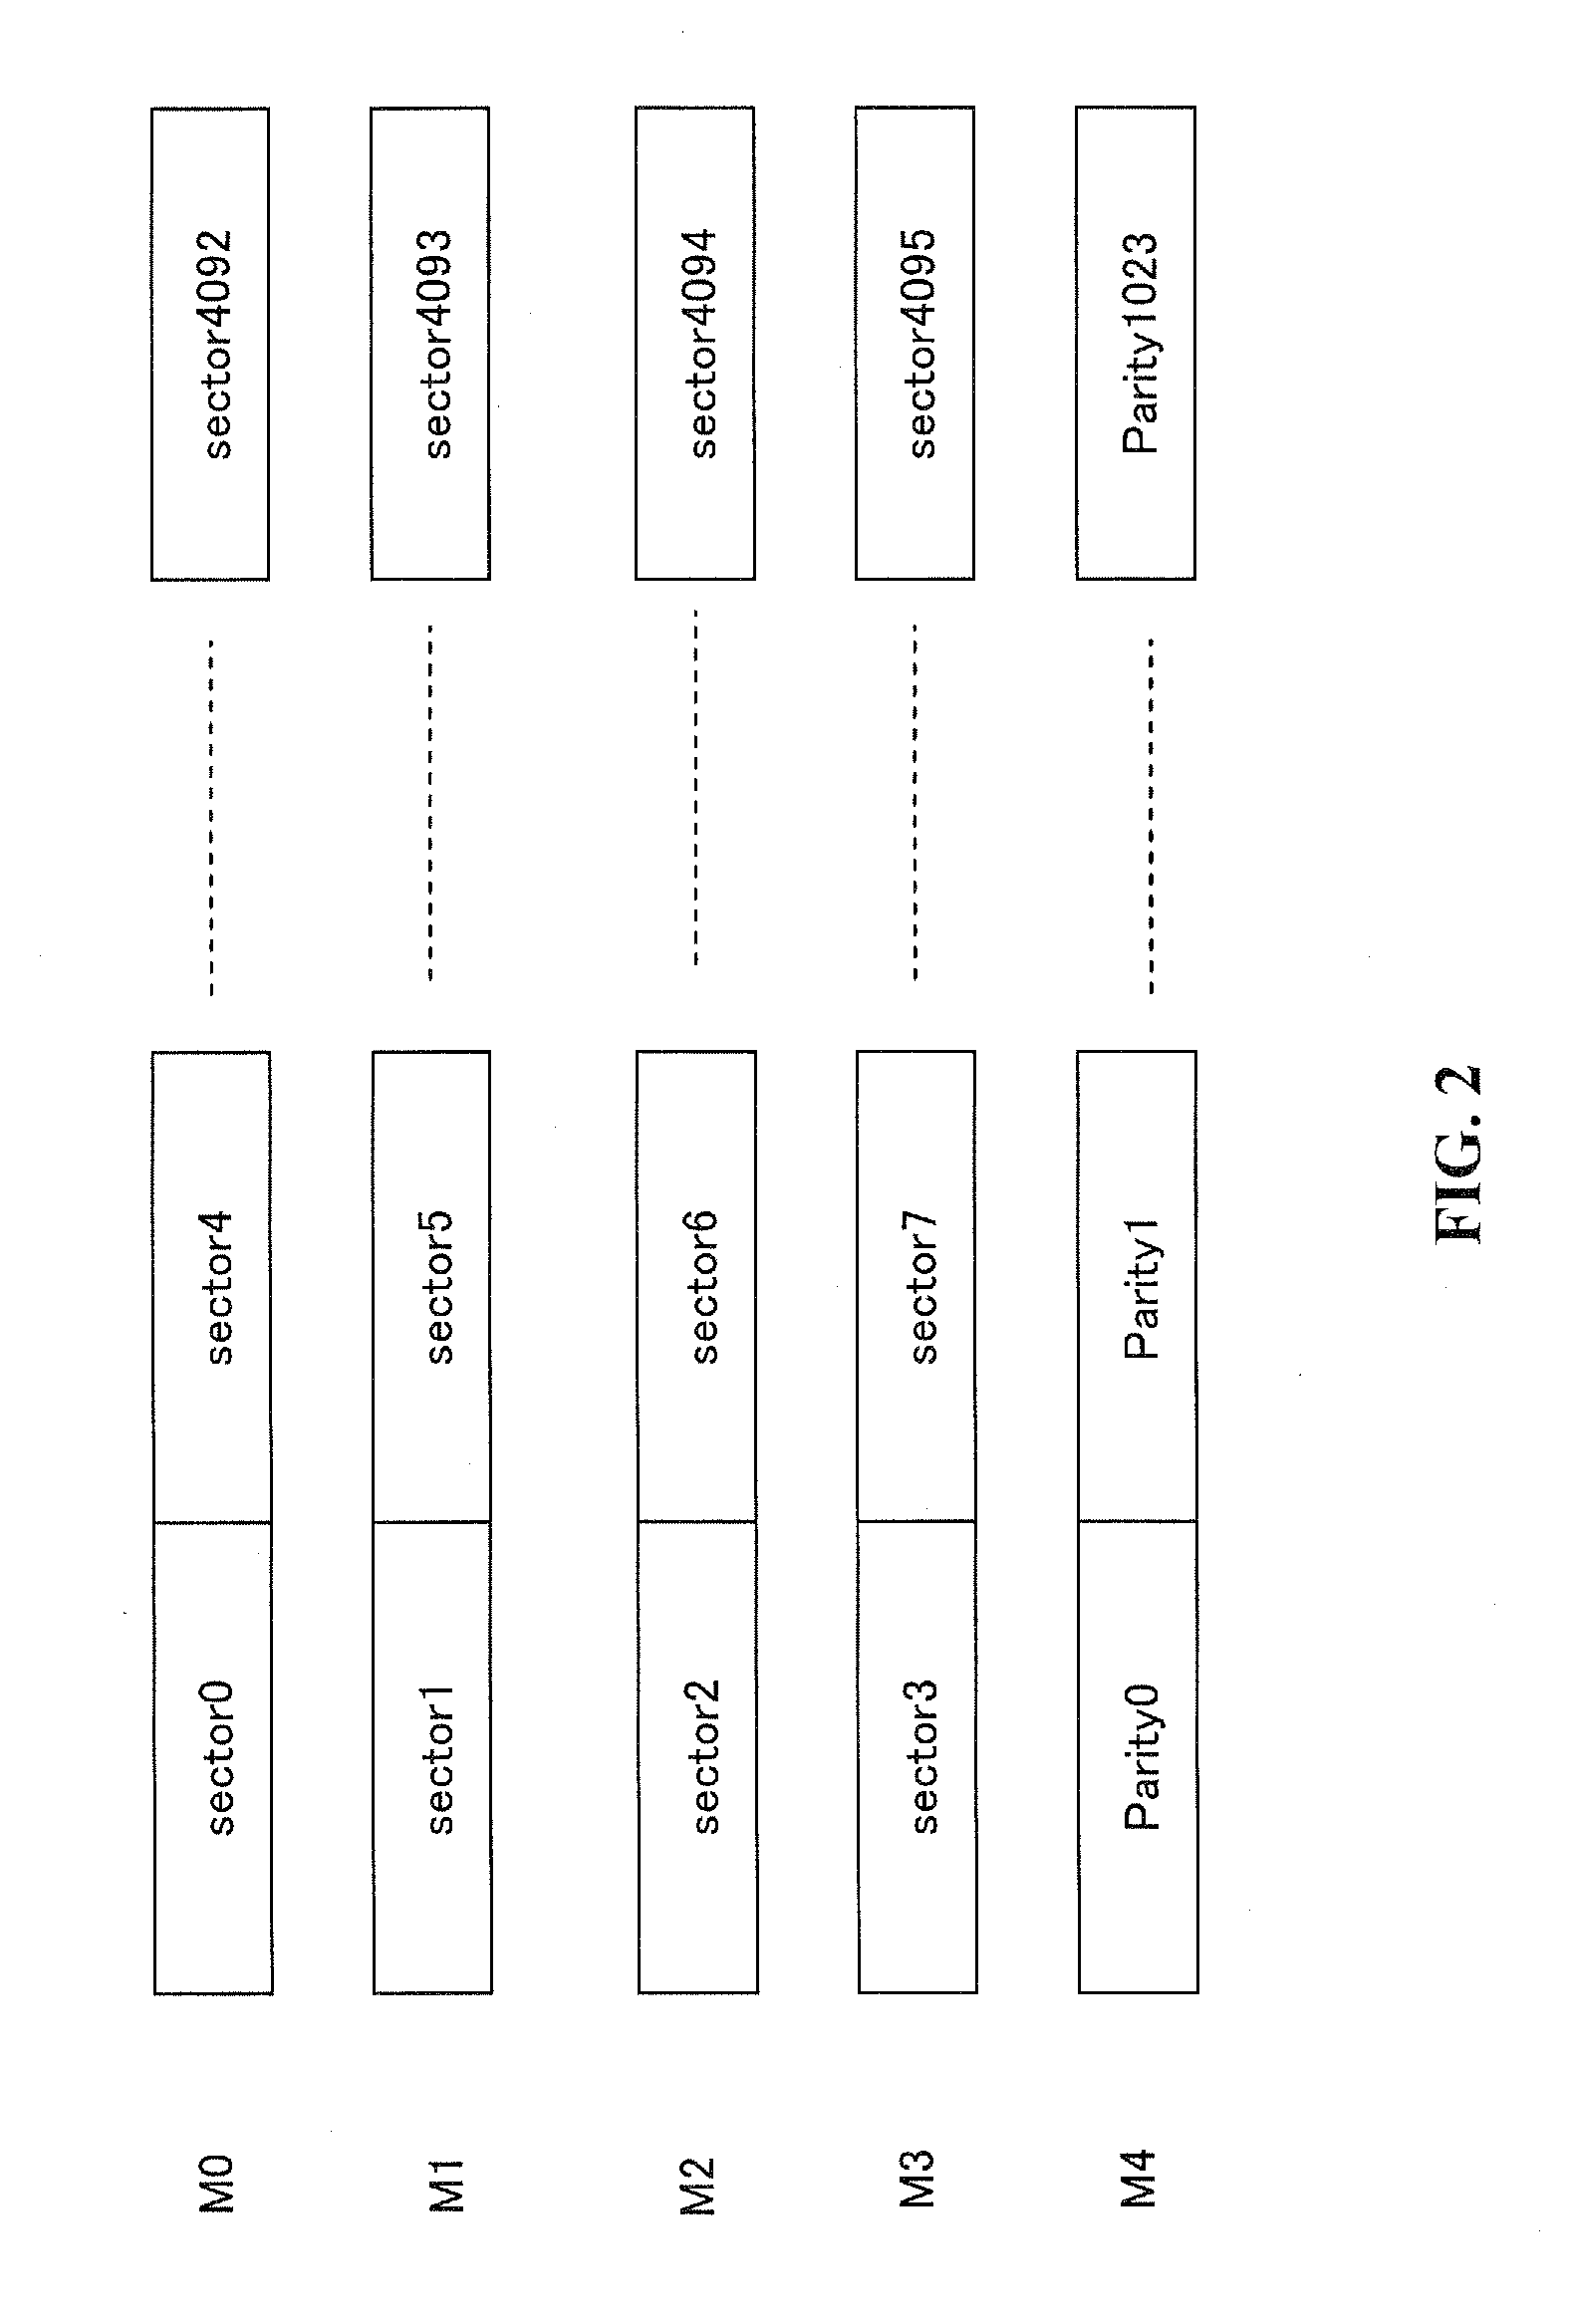 Memory controller and storage device